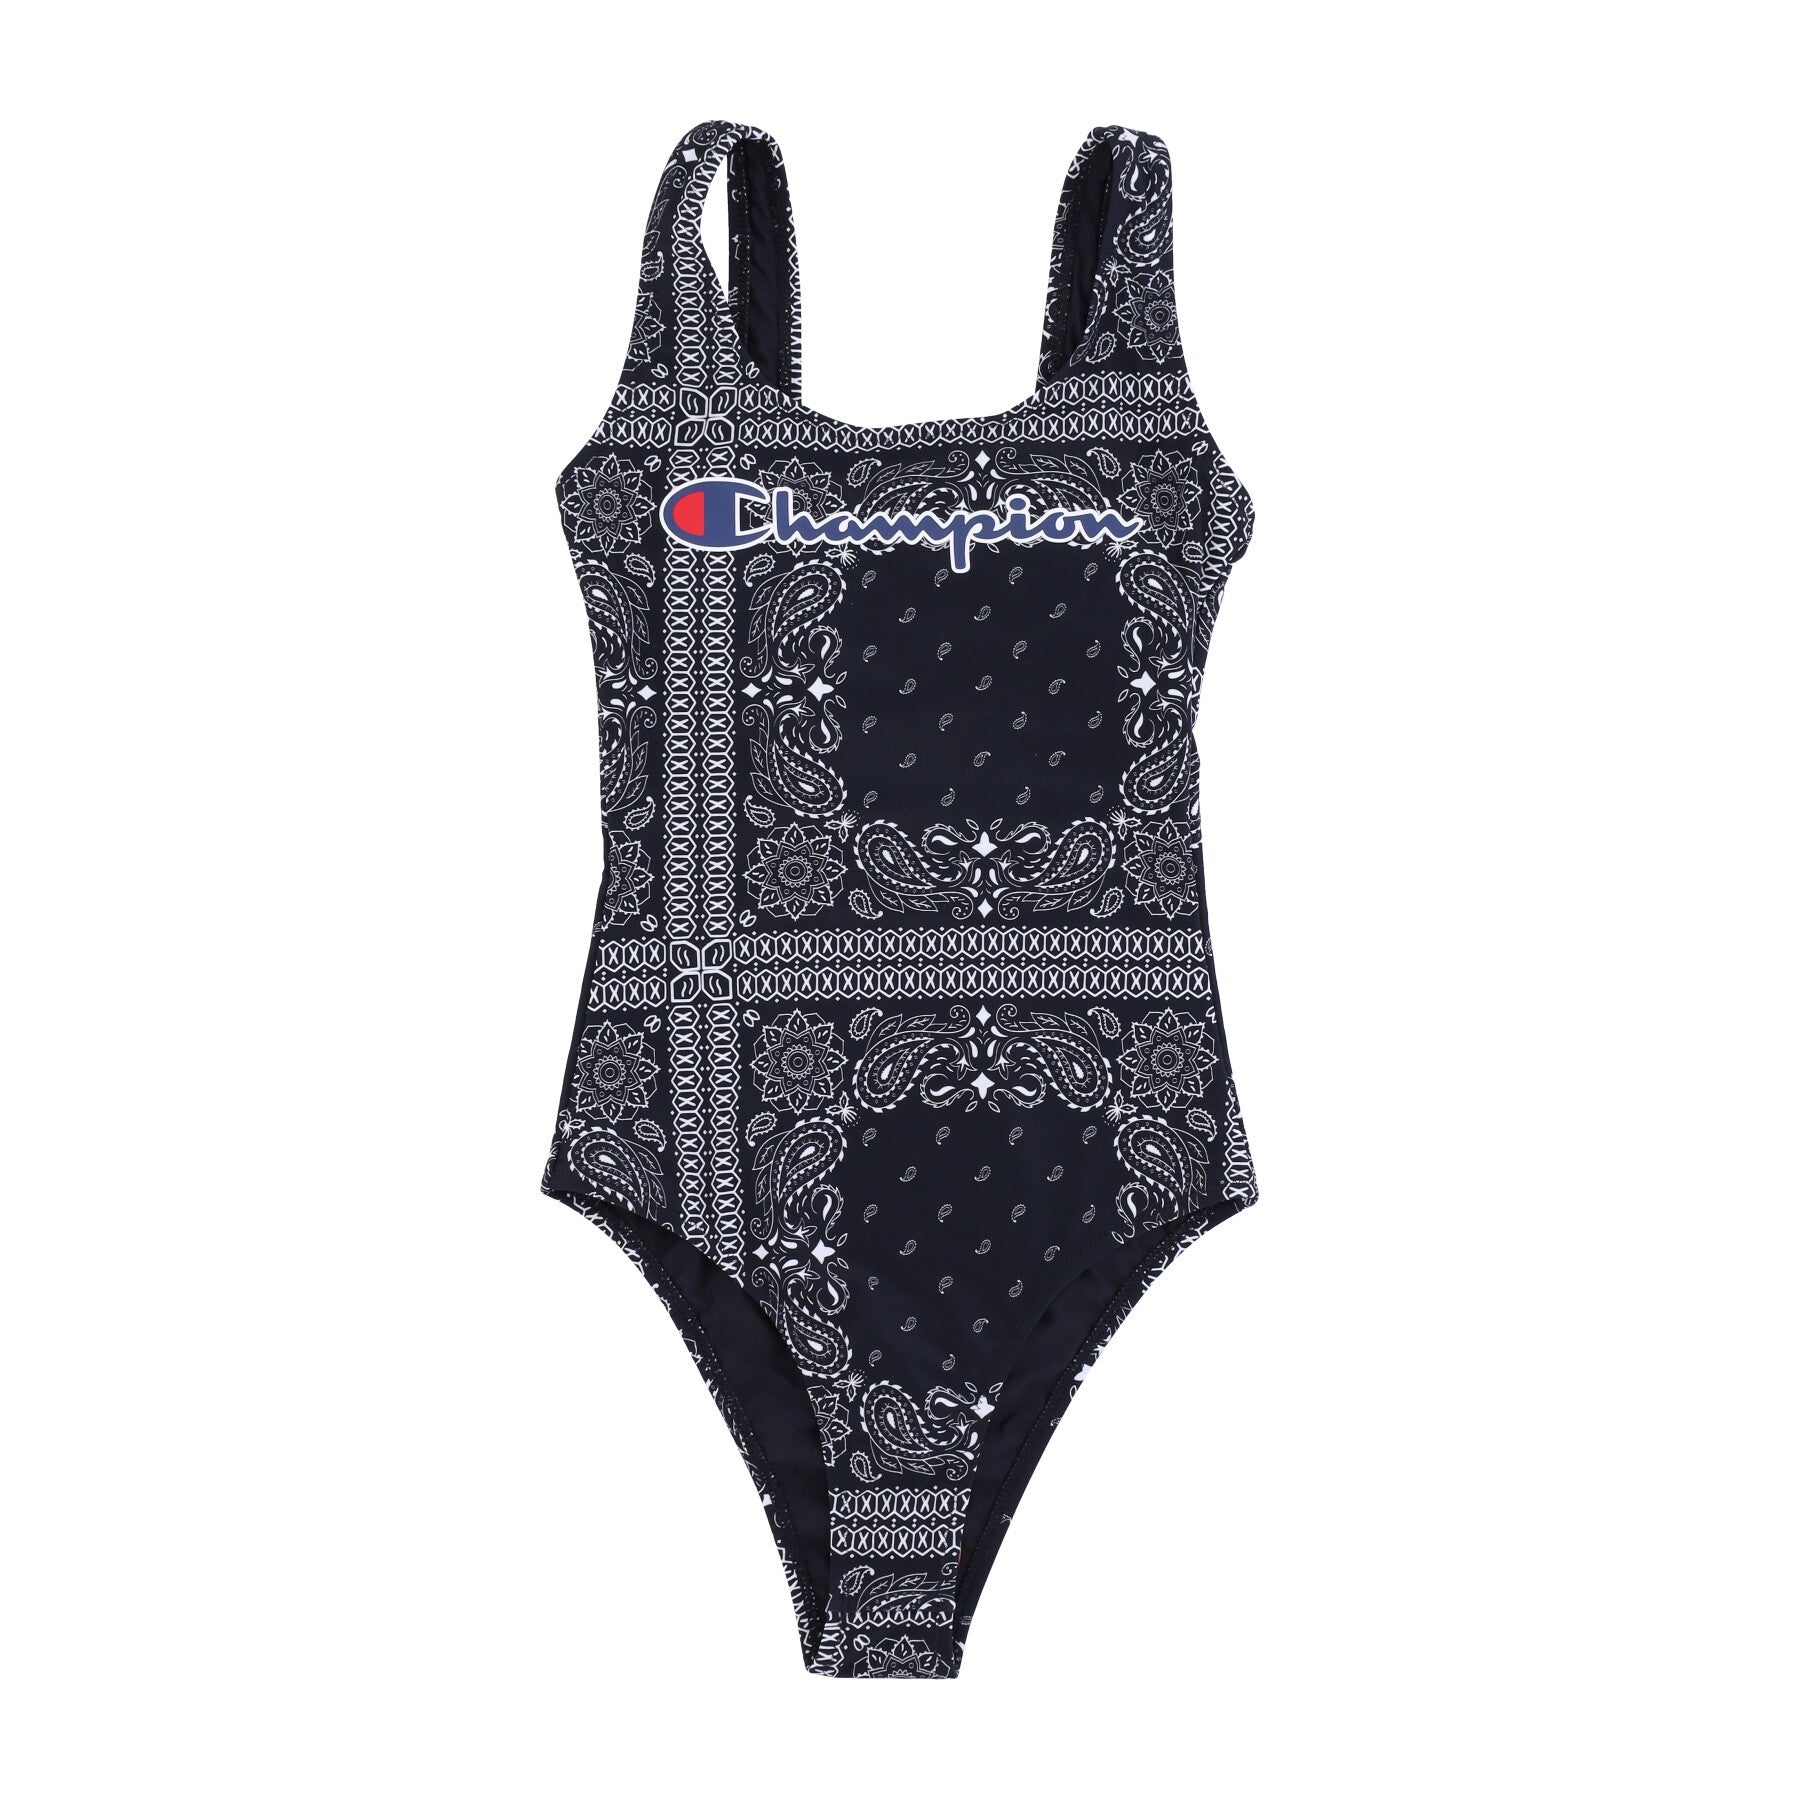 Women's One Piece Swimsuit Swimming Suit Black/allover